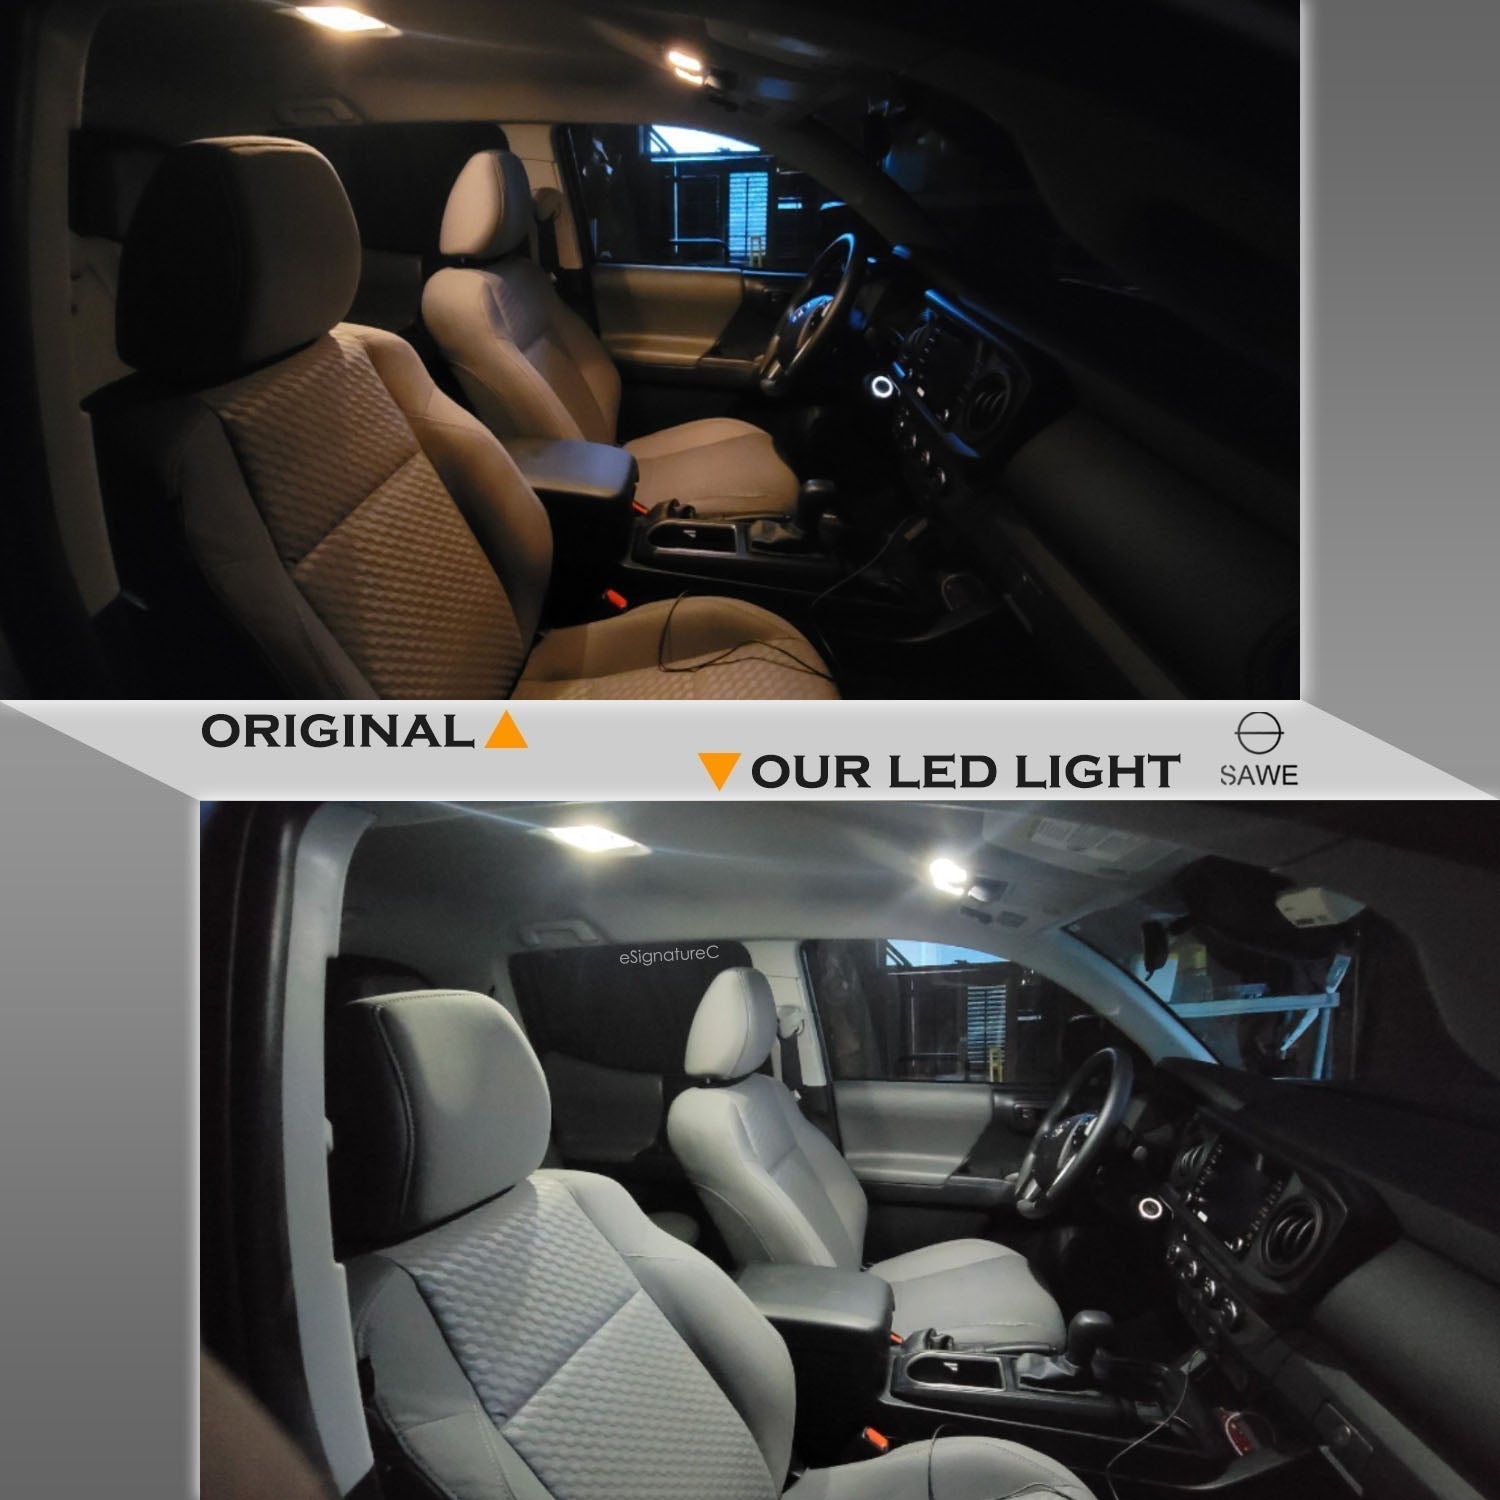 For Toyota Sequoia Interior LED Lights - Dome & Map Lights Package Kit for 2001 - 2007 - White